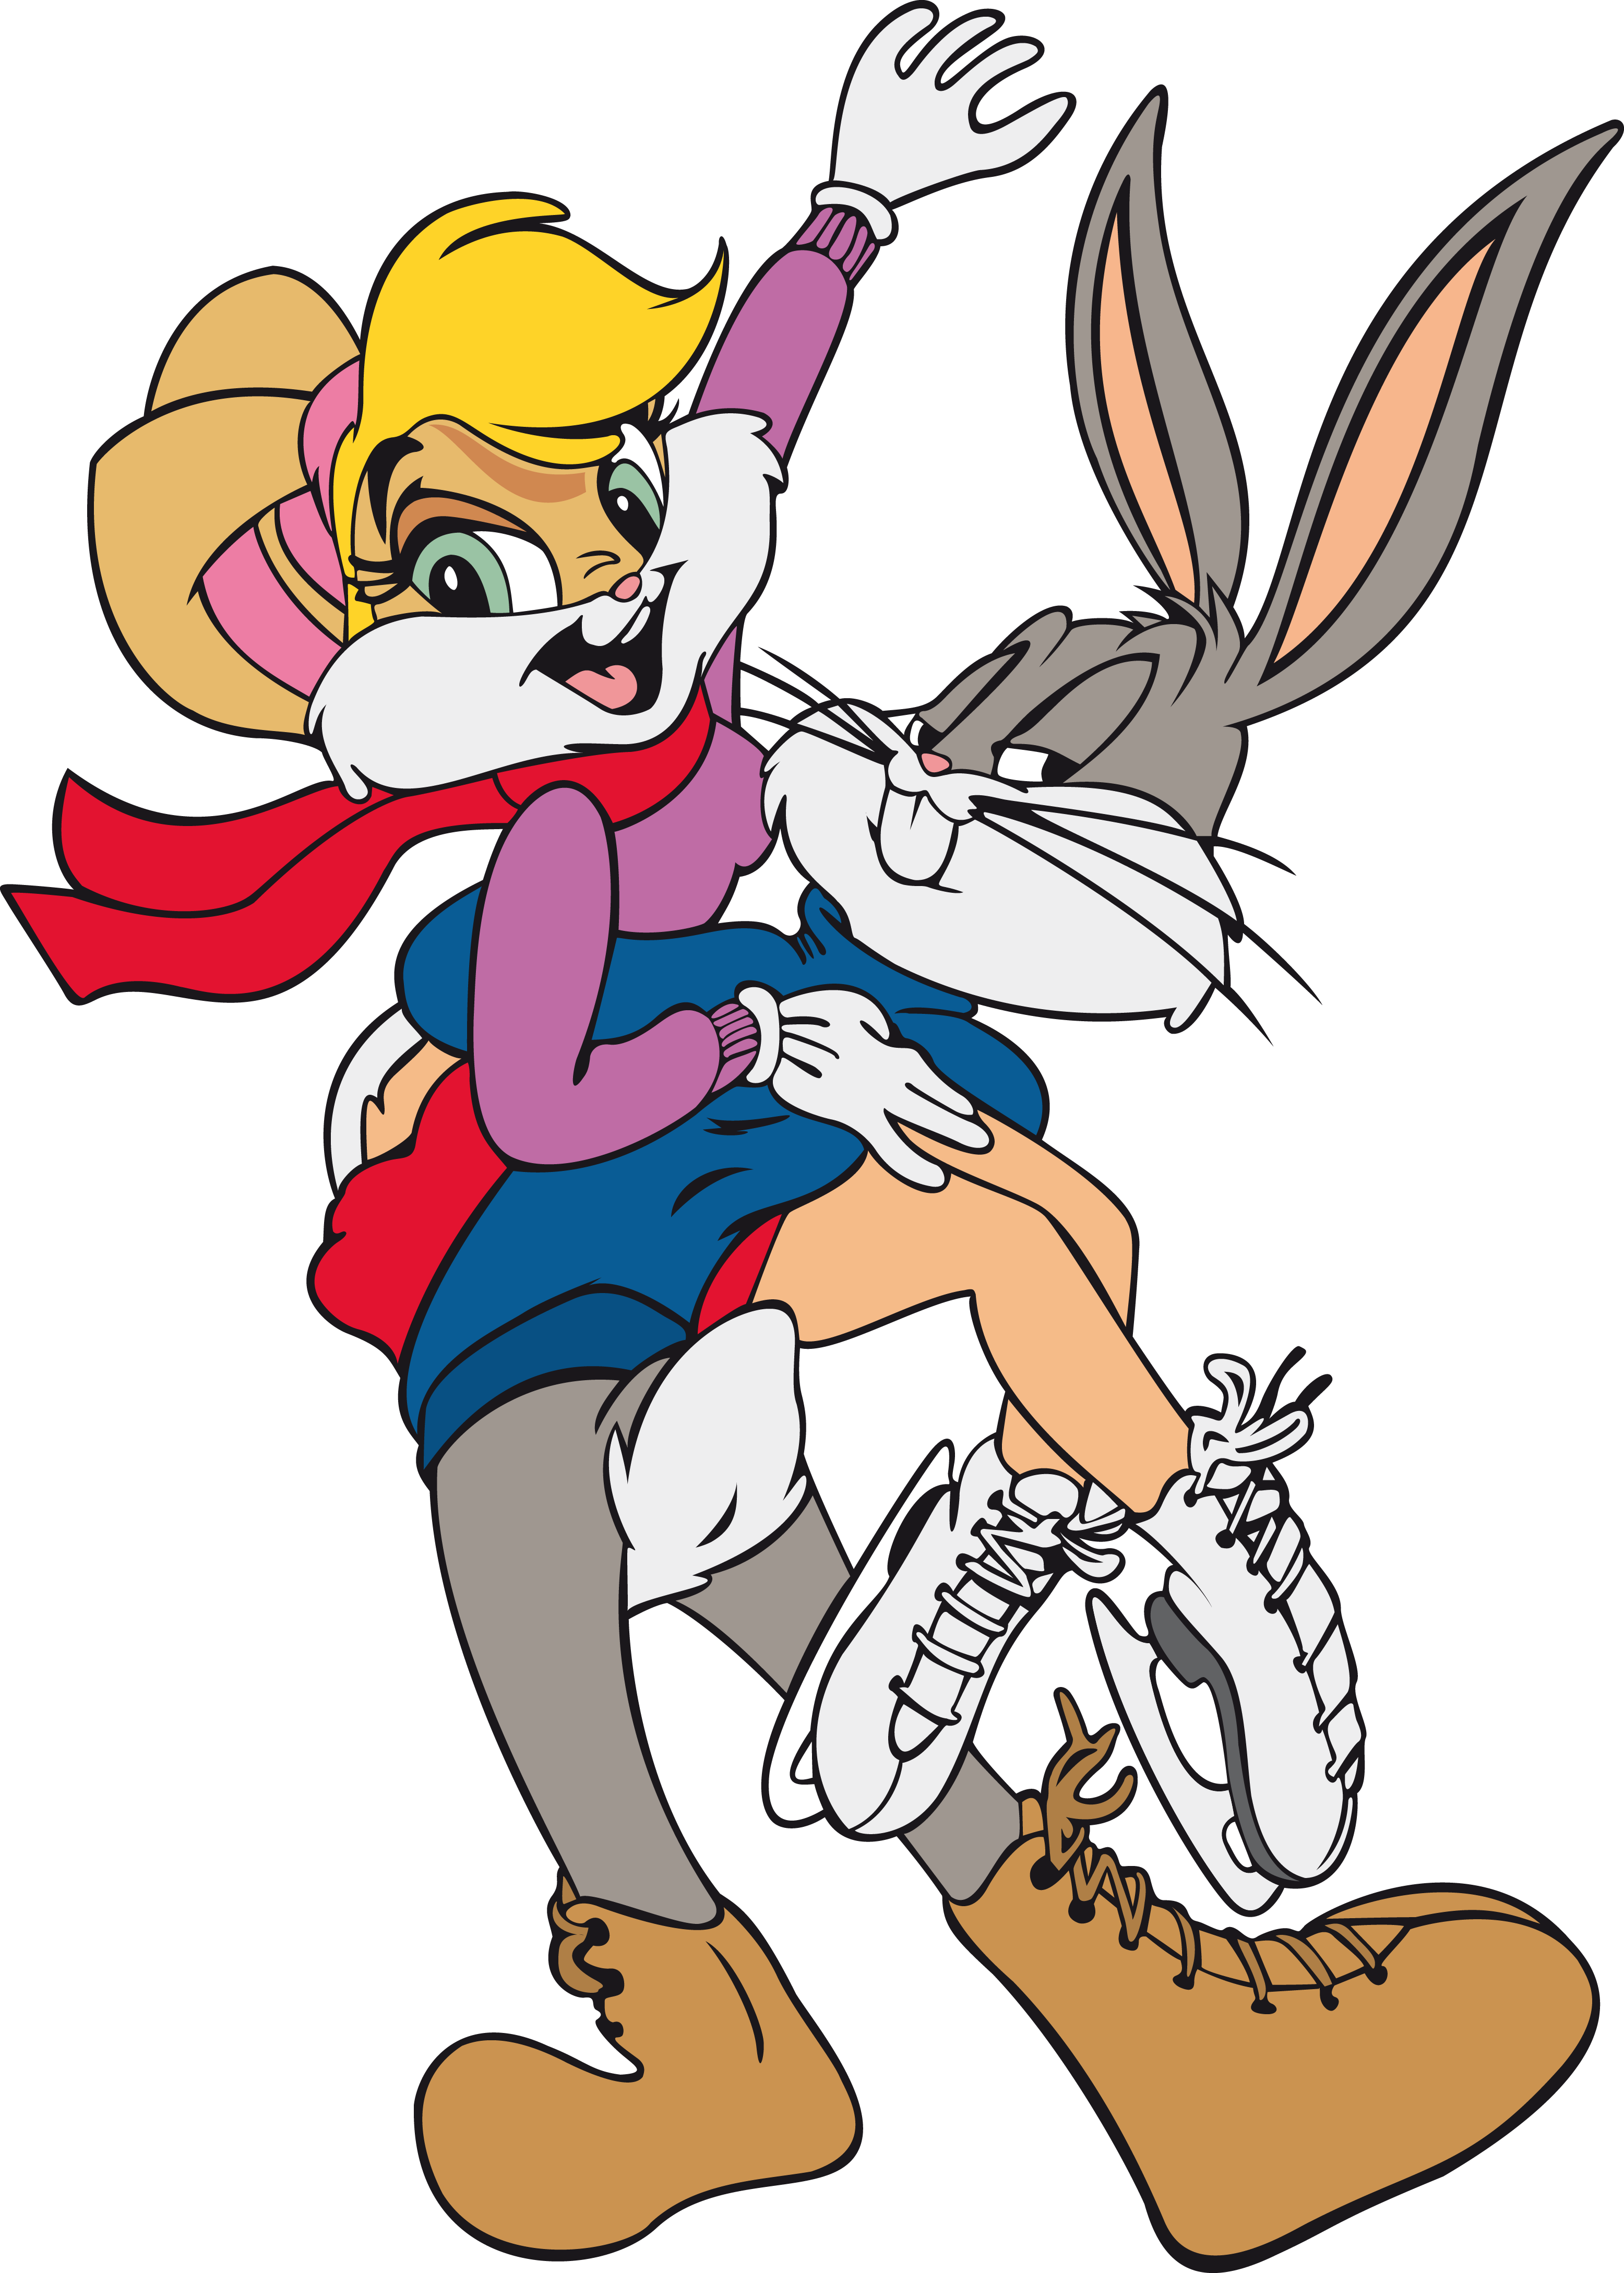 Lola Bunny Image HD Wallpaper And Background Photos